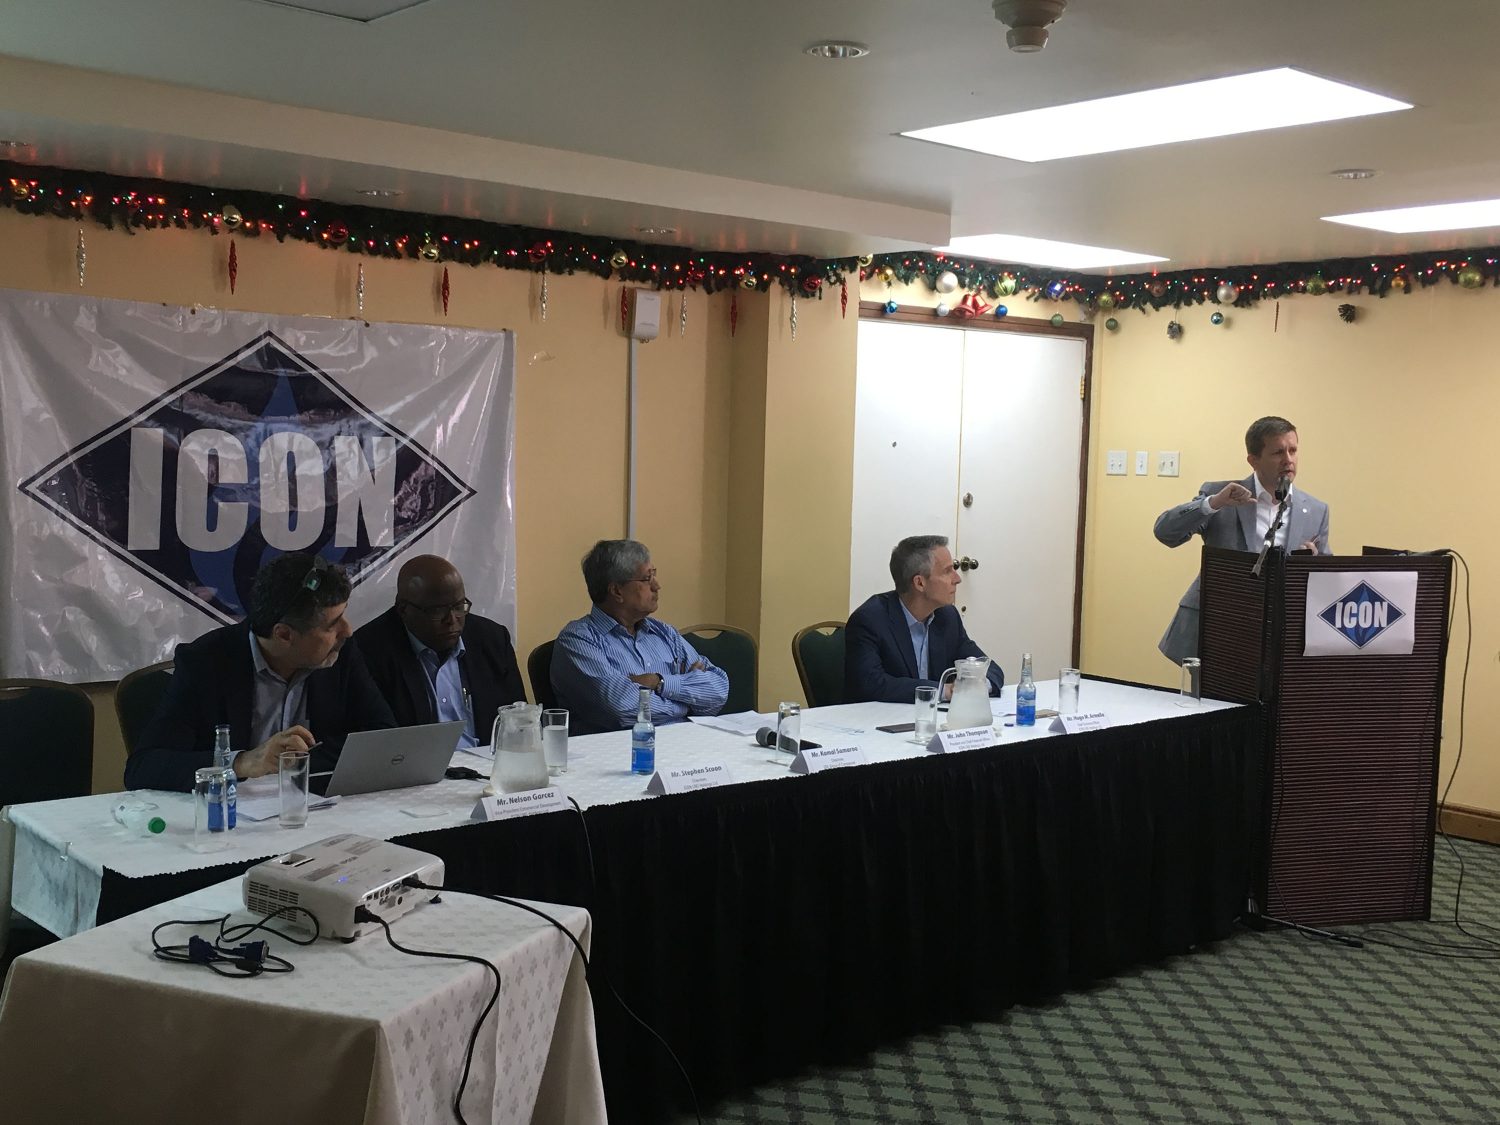 Seated from left: Icon’s Vice President Nelson Garcez, Icon Chairman, Stephen Scoon, DDL Chairman Komal Samaroo, Icon Chief Technical Officer, Hugo Armella, along with Icon President John Thompson (at the podium), during Icon’s official launch yesterday at Cara Lodge.